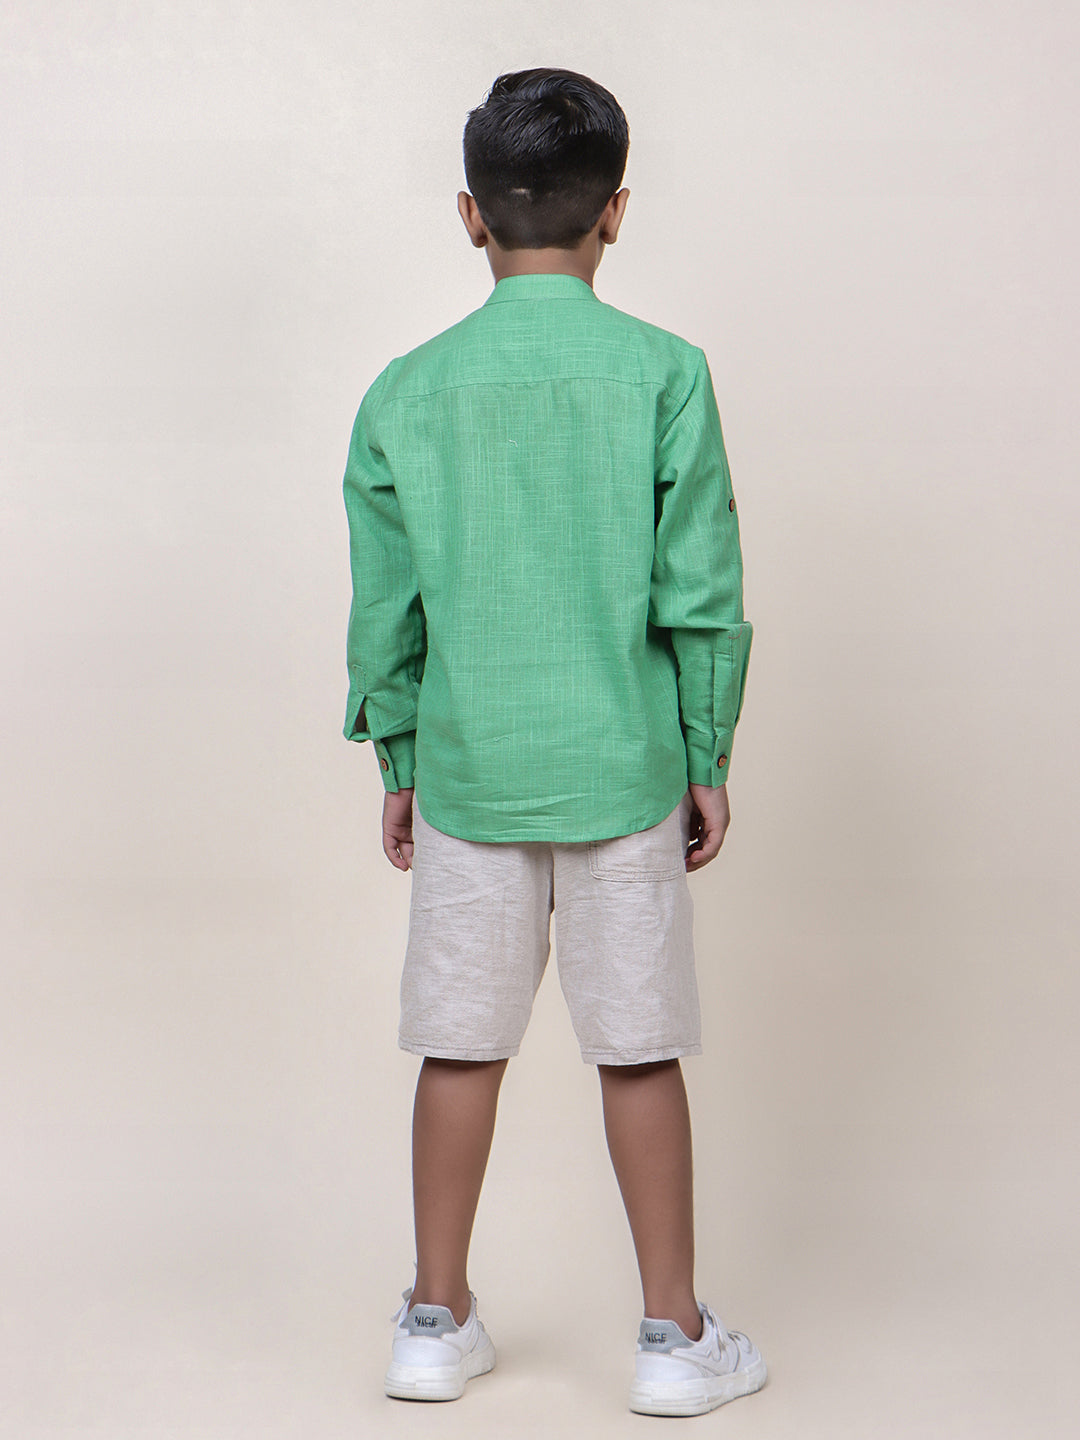 Boys Seen Colorblocked rolled up Cotton Shirt